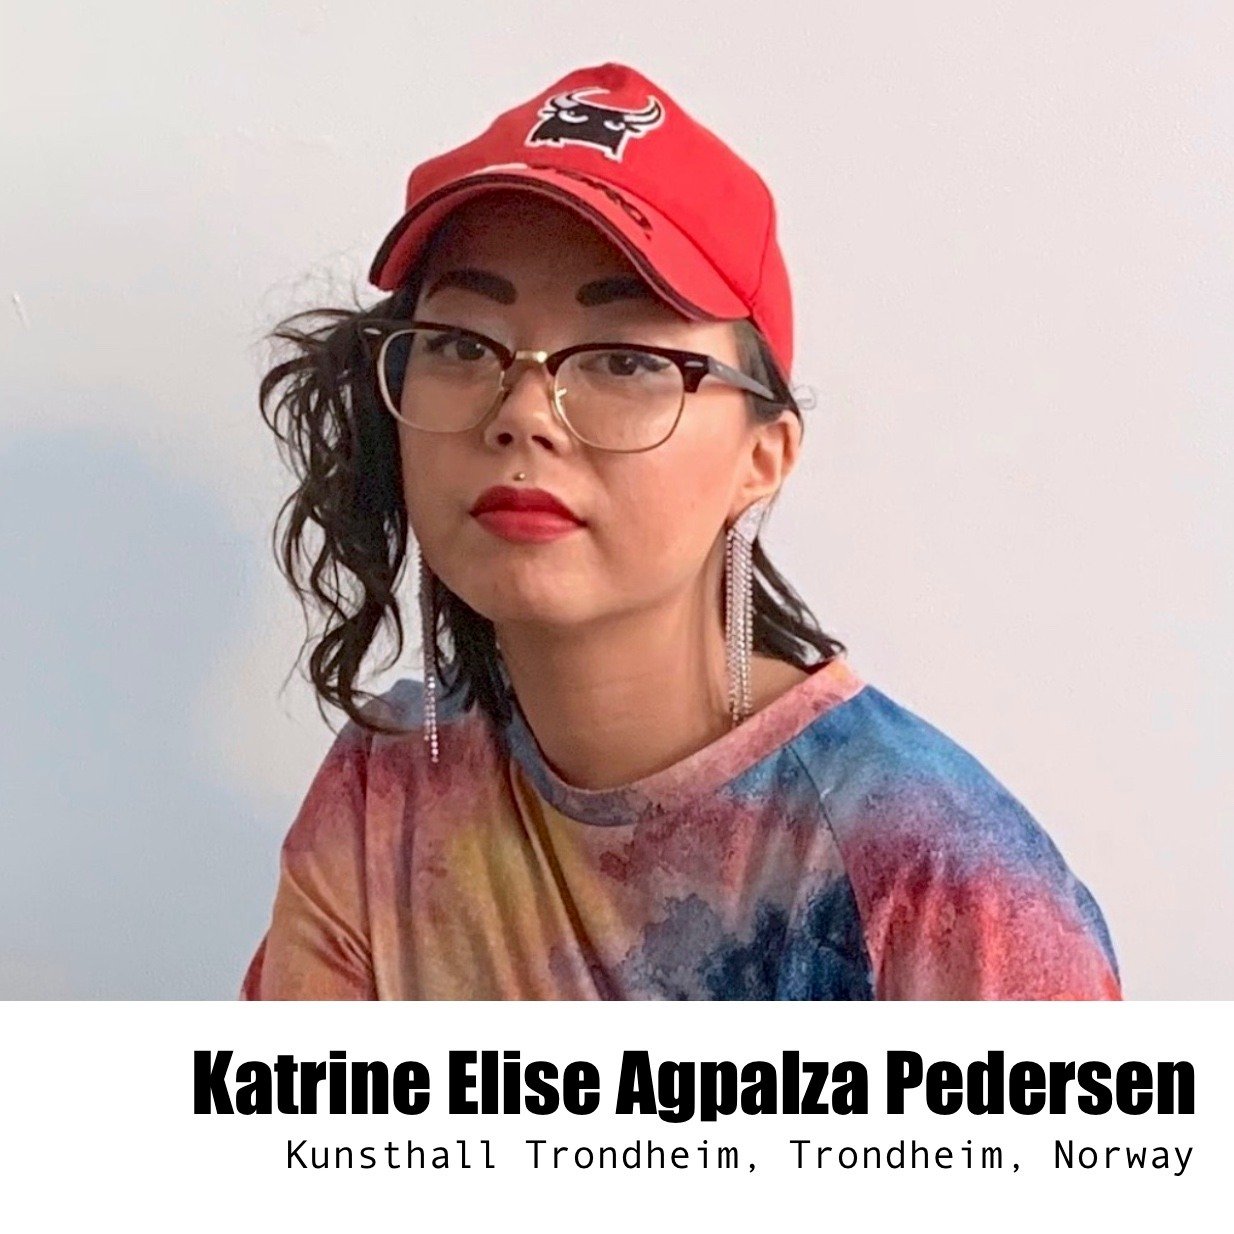 Meet new IKT Member: Katrine Elise Agpalza Pedersen @silkepion

Katrine Elise Agpalza Pedersen is an art historian and curator based in Trondheim, Norway. She earned her MA in Art History at the University of Oslo. Pedersen served as Interim Director